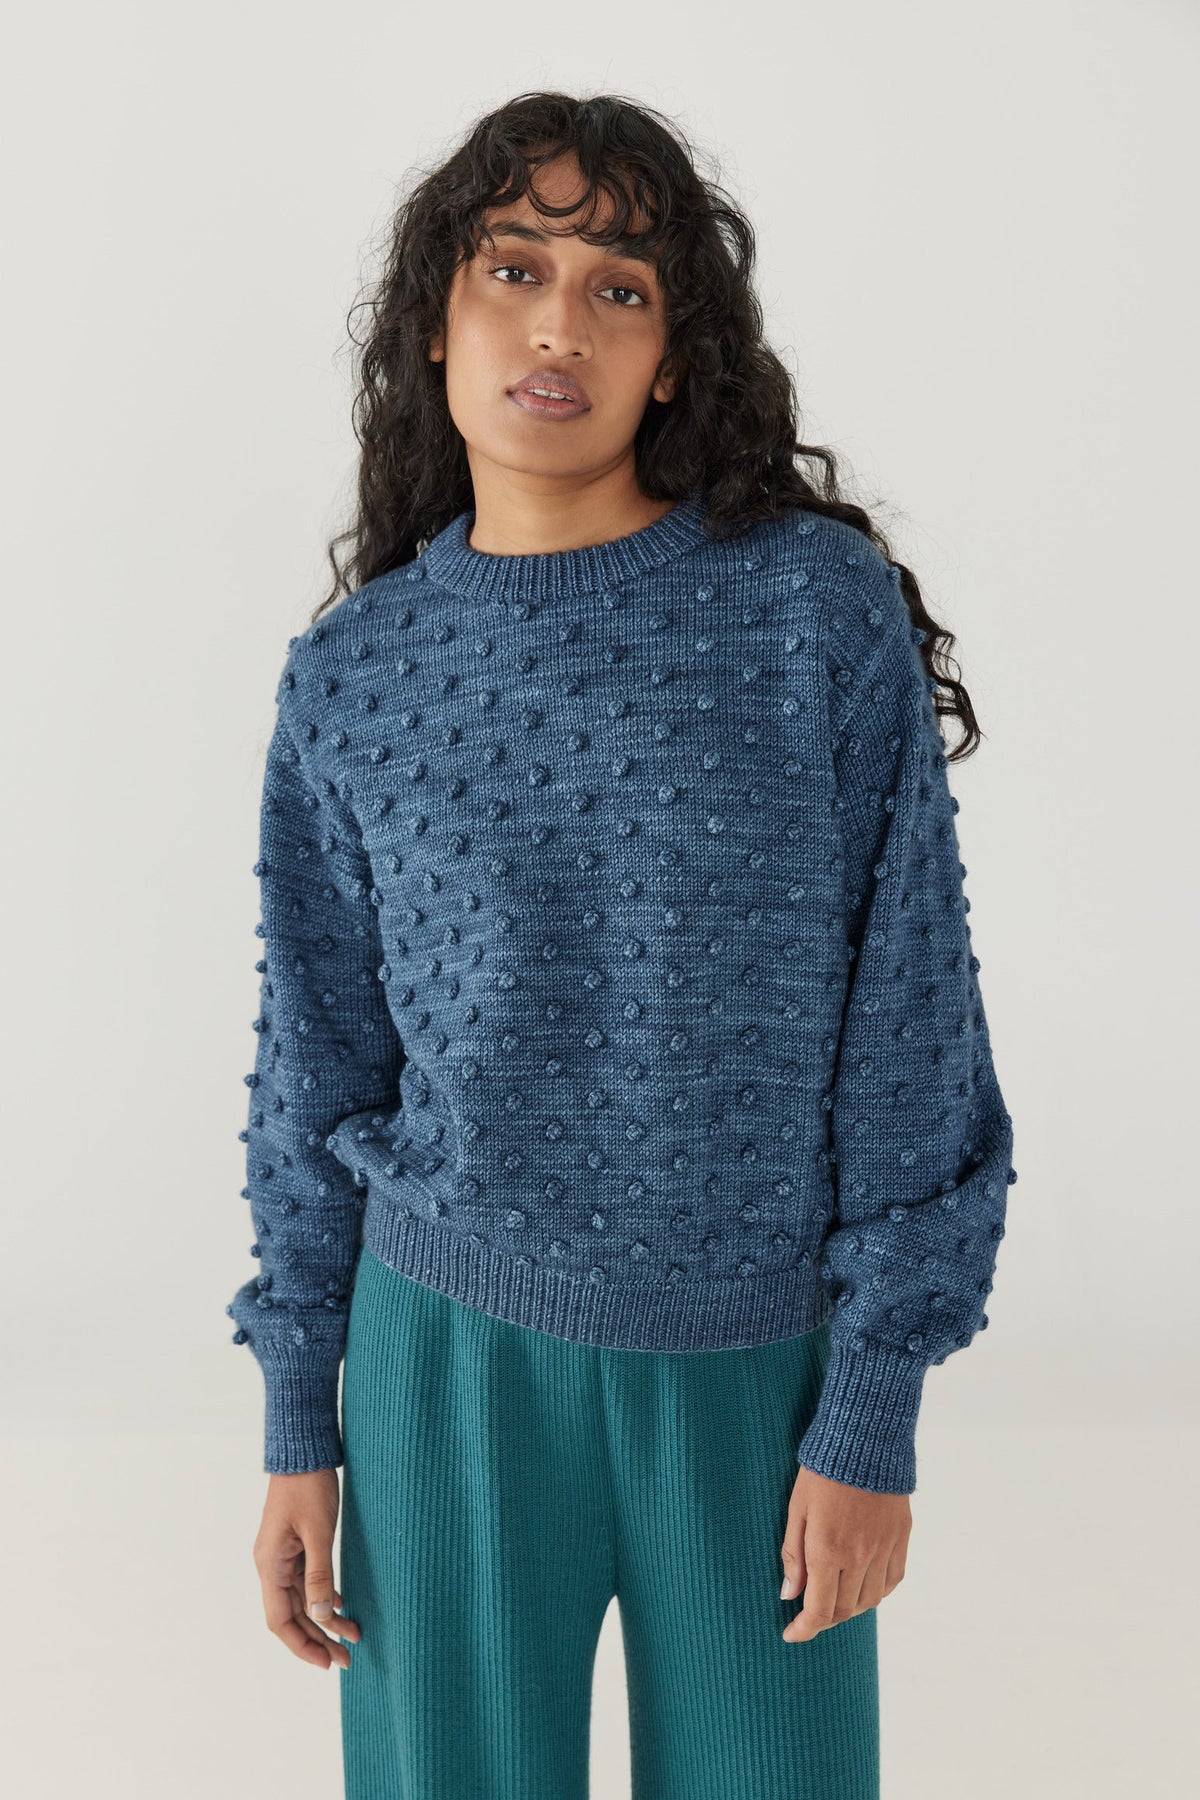 Adult Popcorn Crew Sweater - Dusk+Model is 5&#39;9&quot; | 31&quot; Bust | 24&quot; Waist | 34&quot; Hips | size 2, wearing a size Small